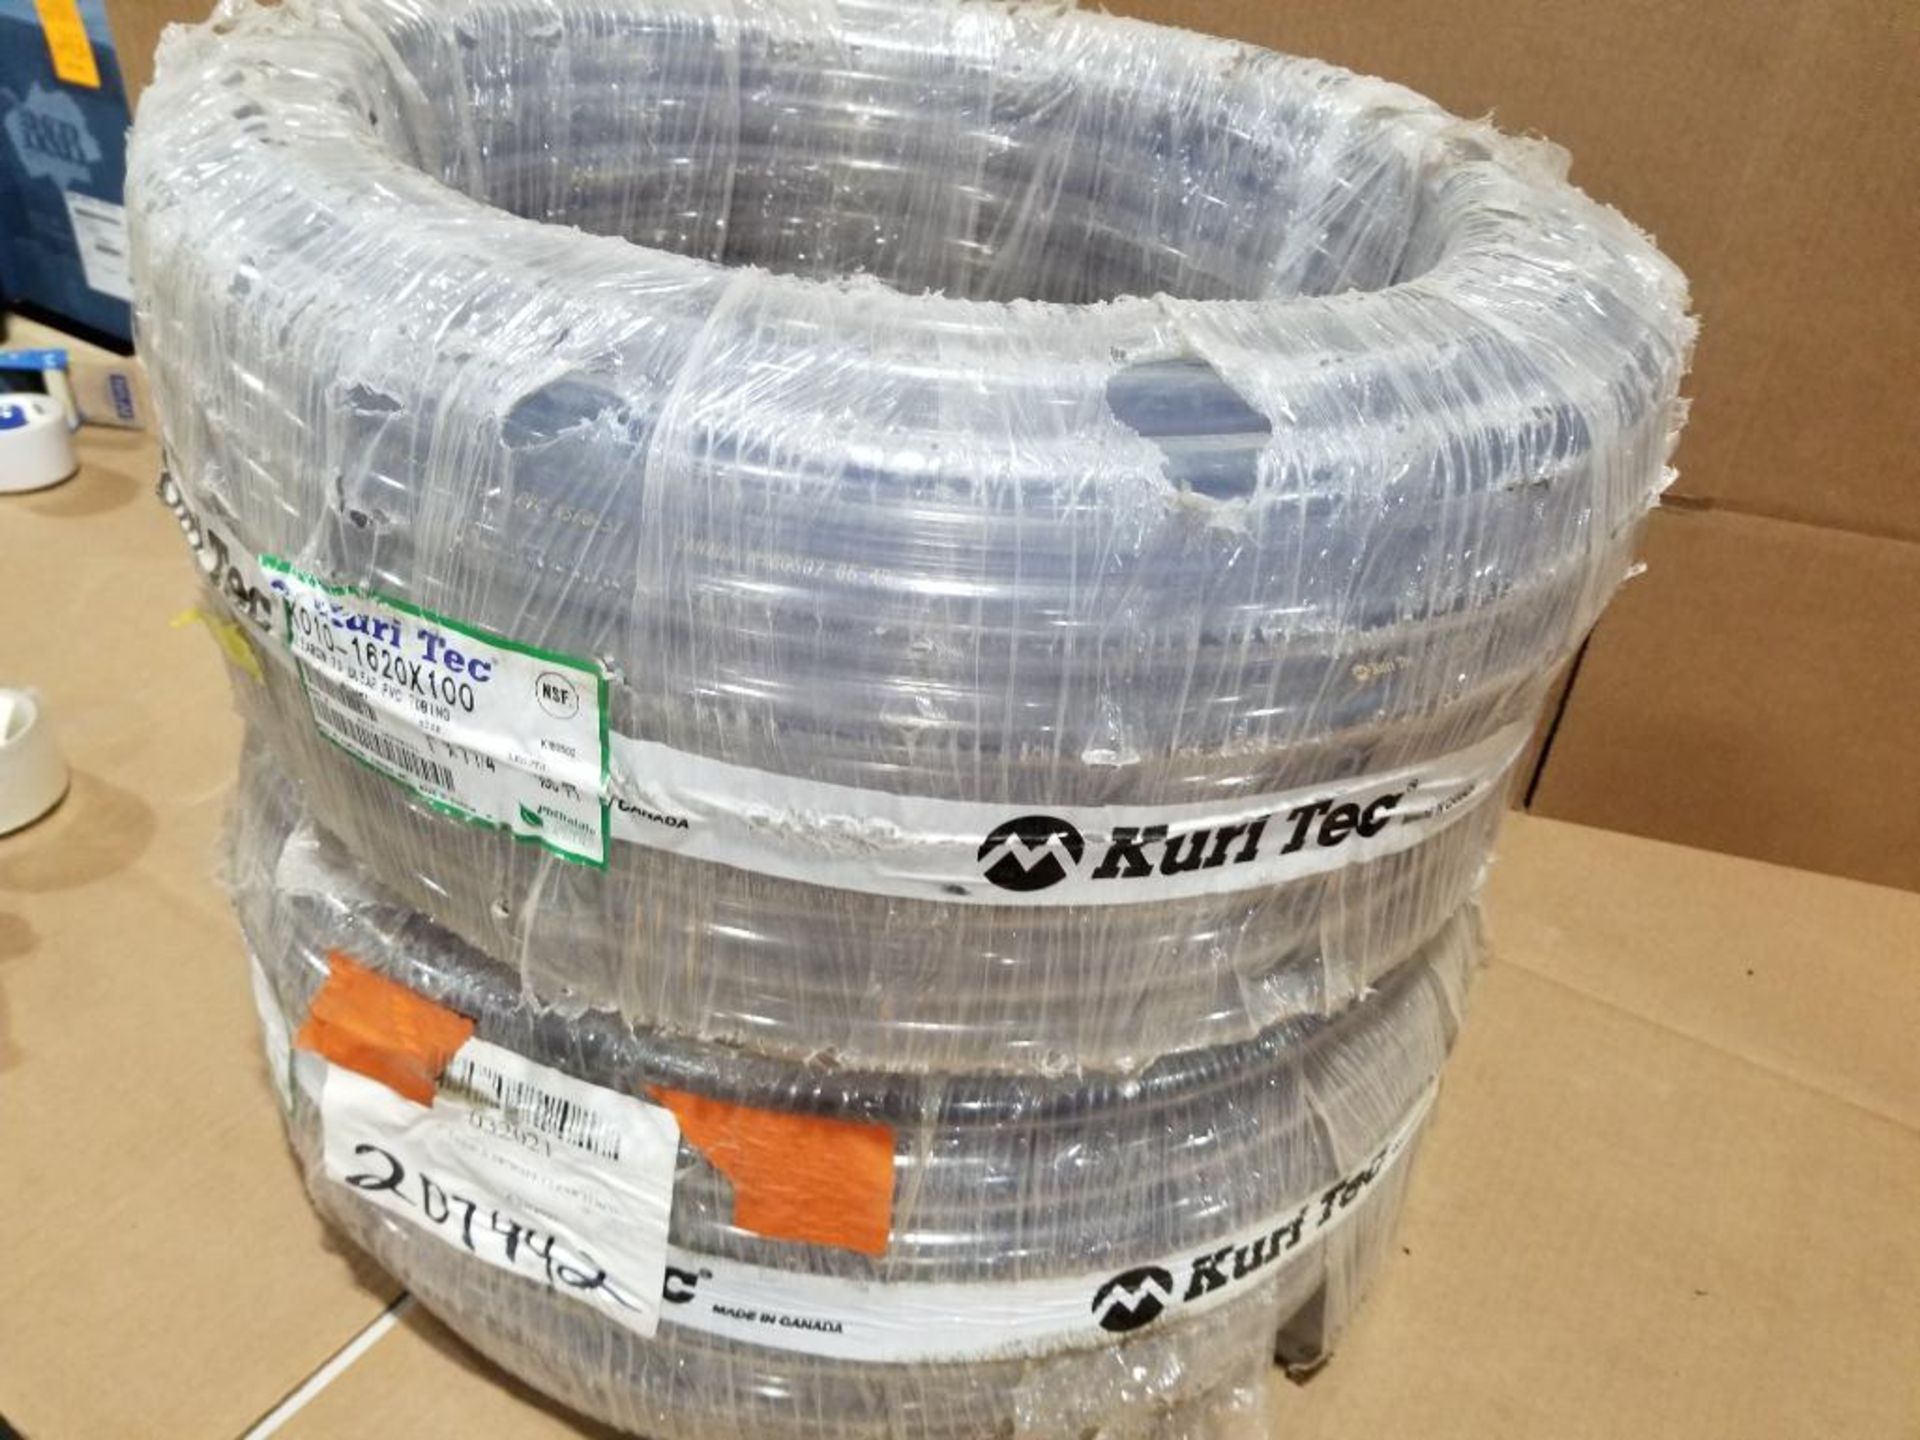 Qty 200 ft - Kuri-Tec clear PVC tubing. 1in x 1 1/4in. 2 boxes of 100ft. Part number K010-1620X100. - Image 4 of 6